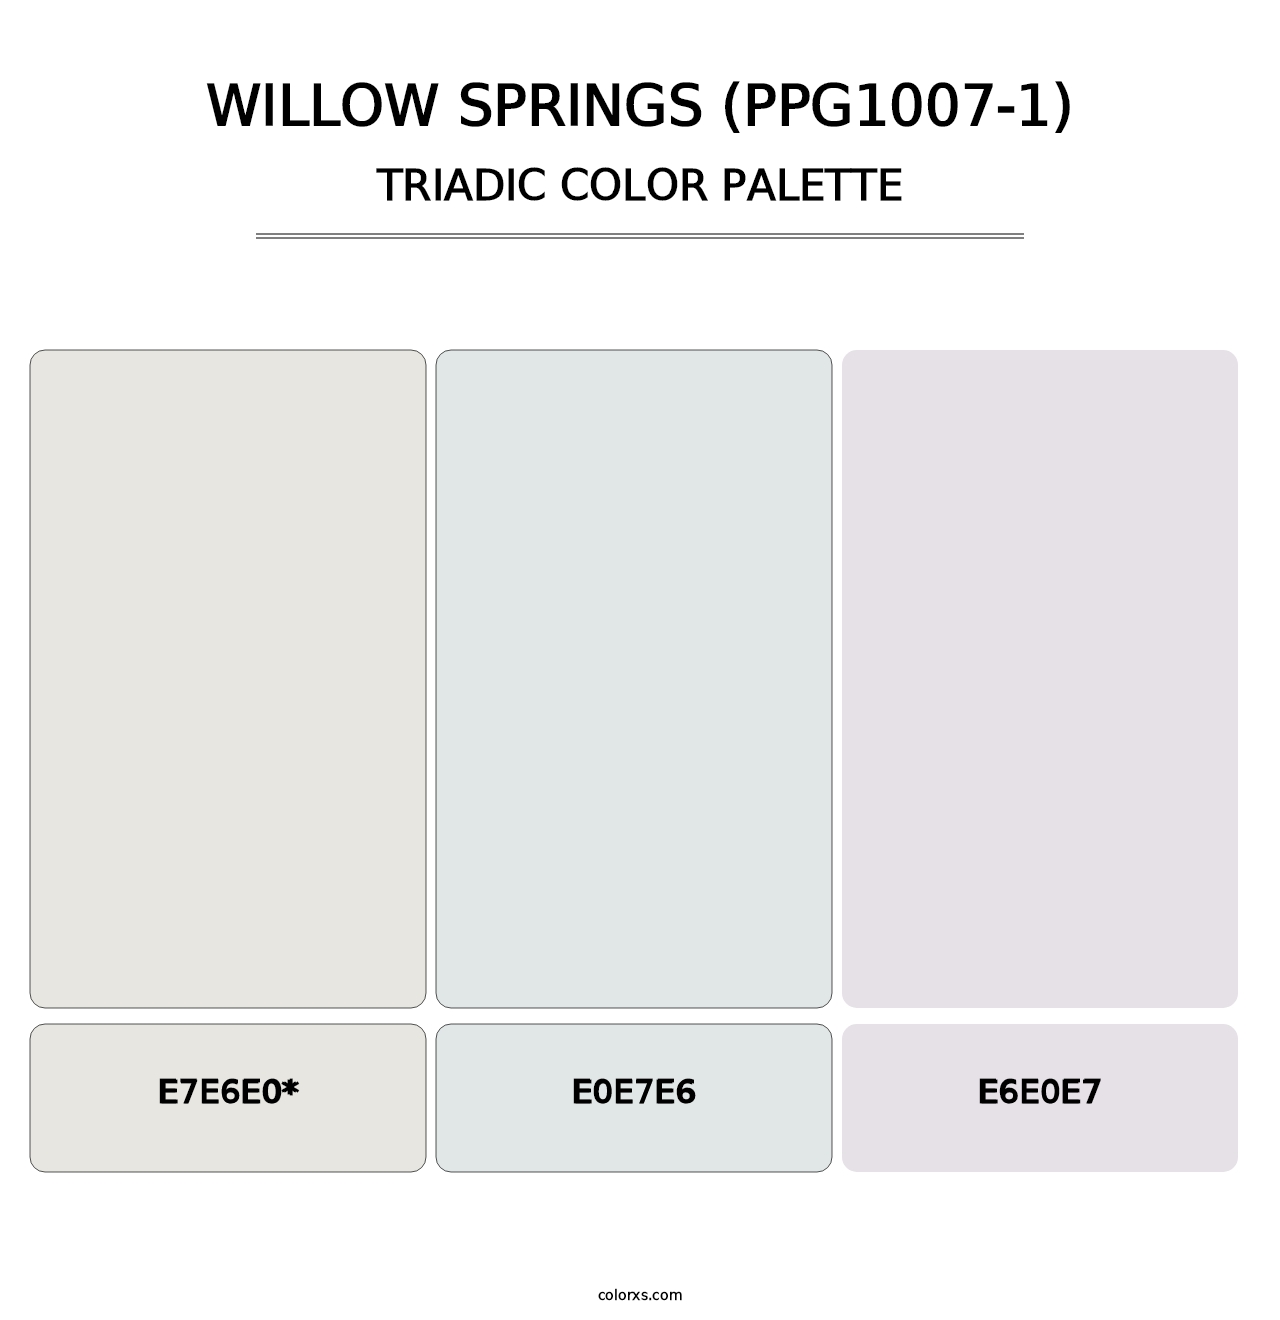 Willow Springs (PPG1007-1) - Triadic Color Palette